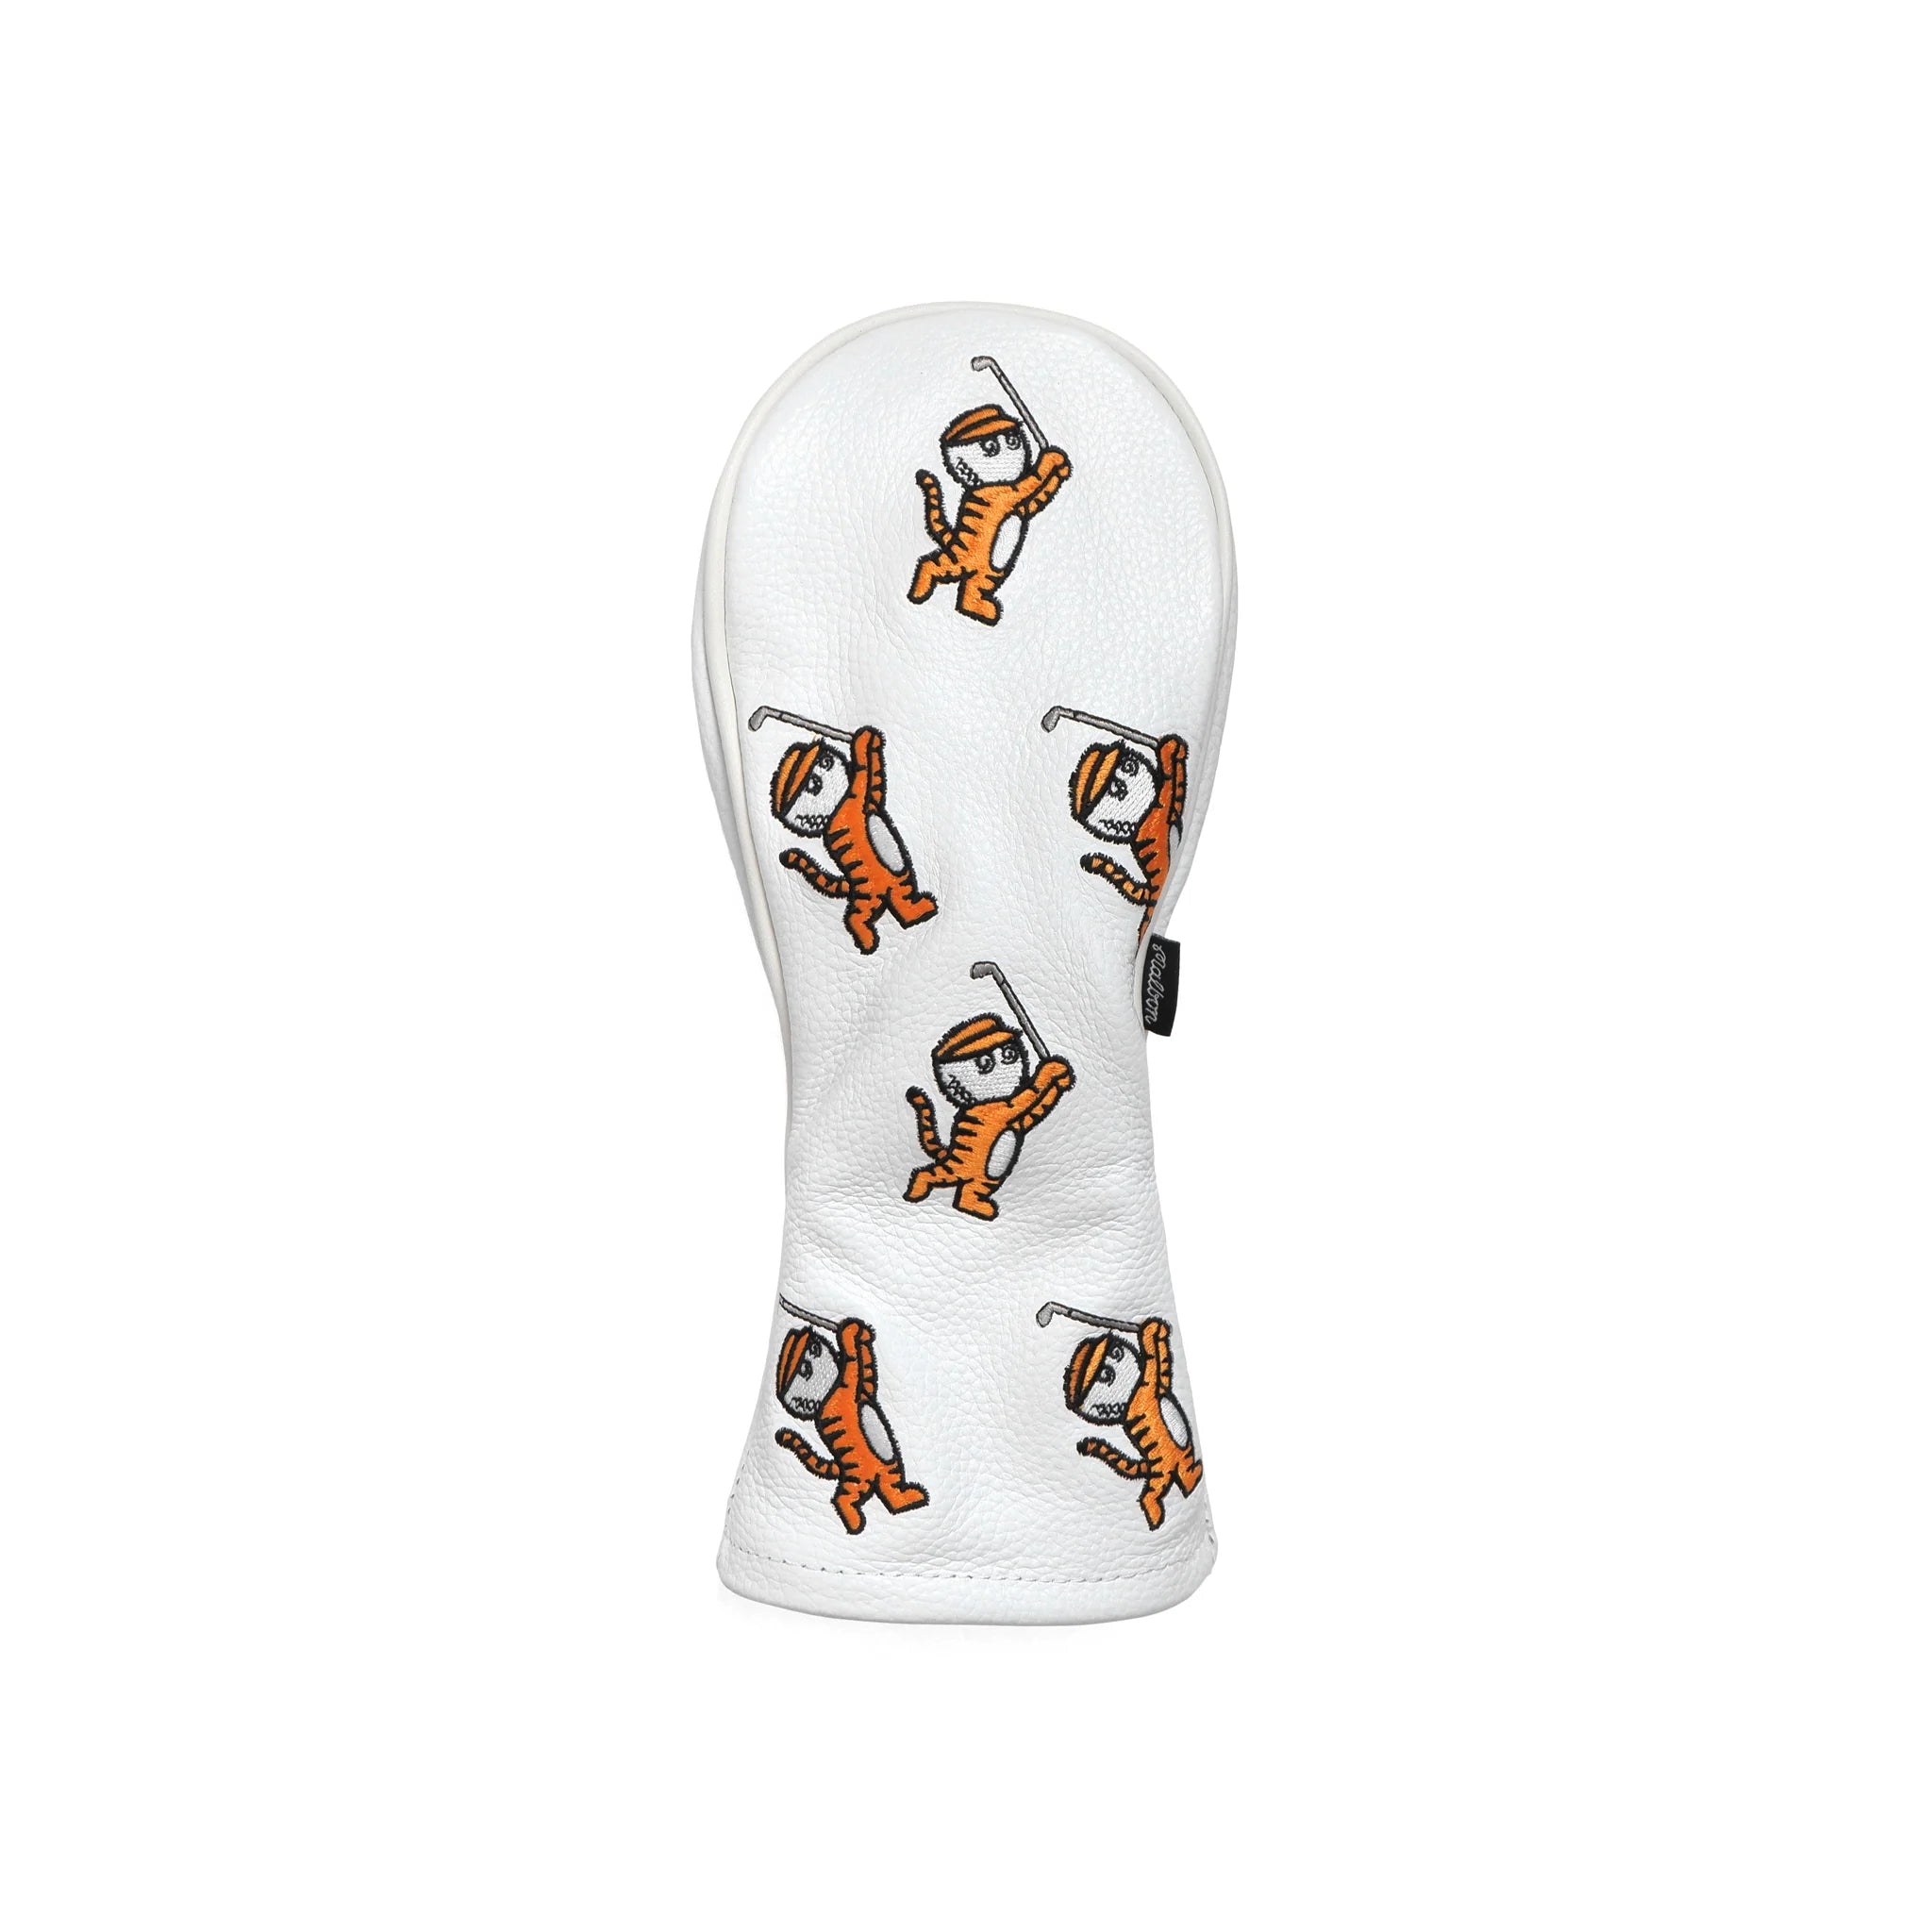 MALBON GOLF TIGER BUCKETS WOOD COVER ONE SIZE WHITE